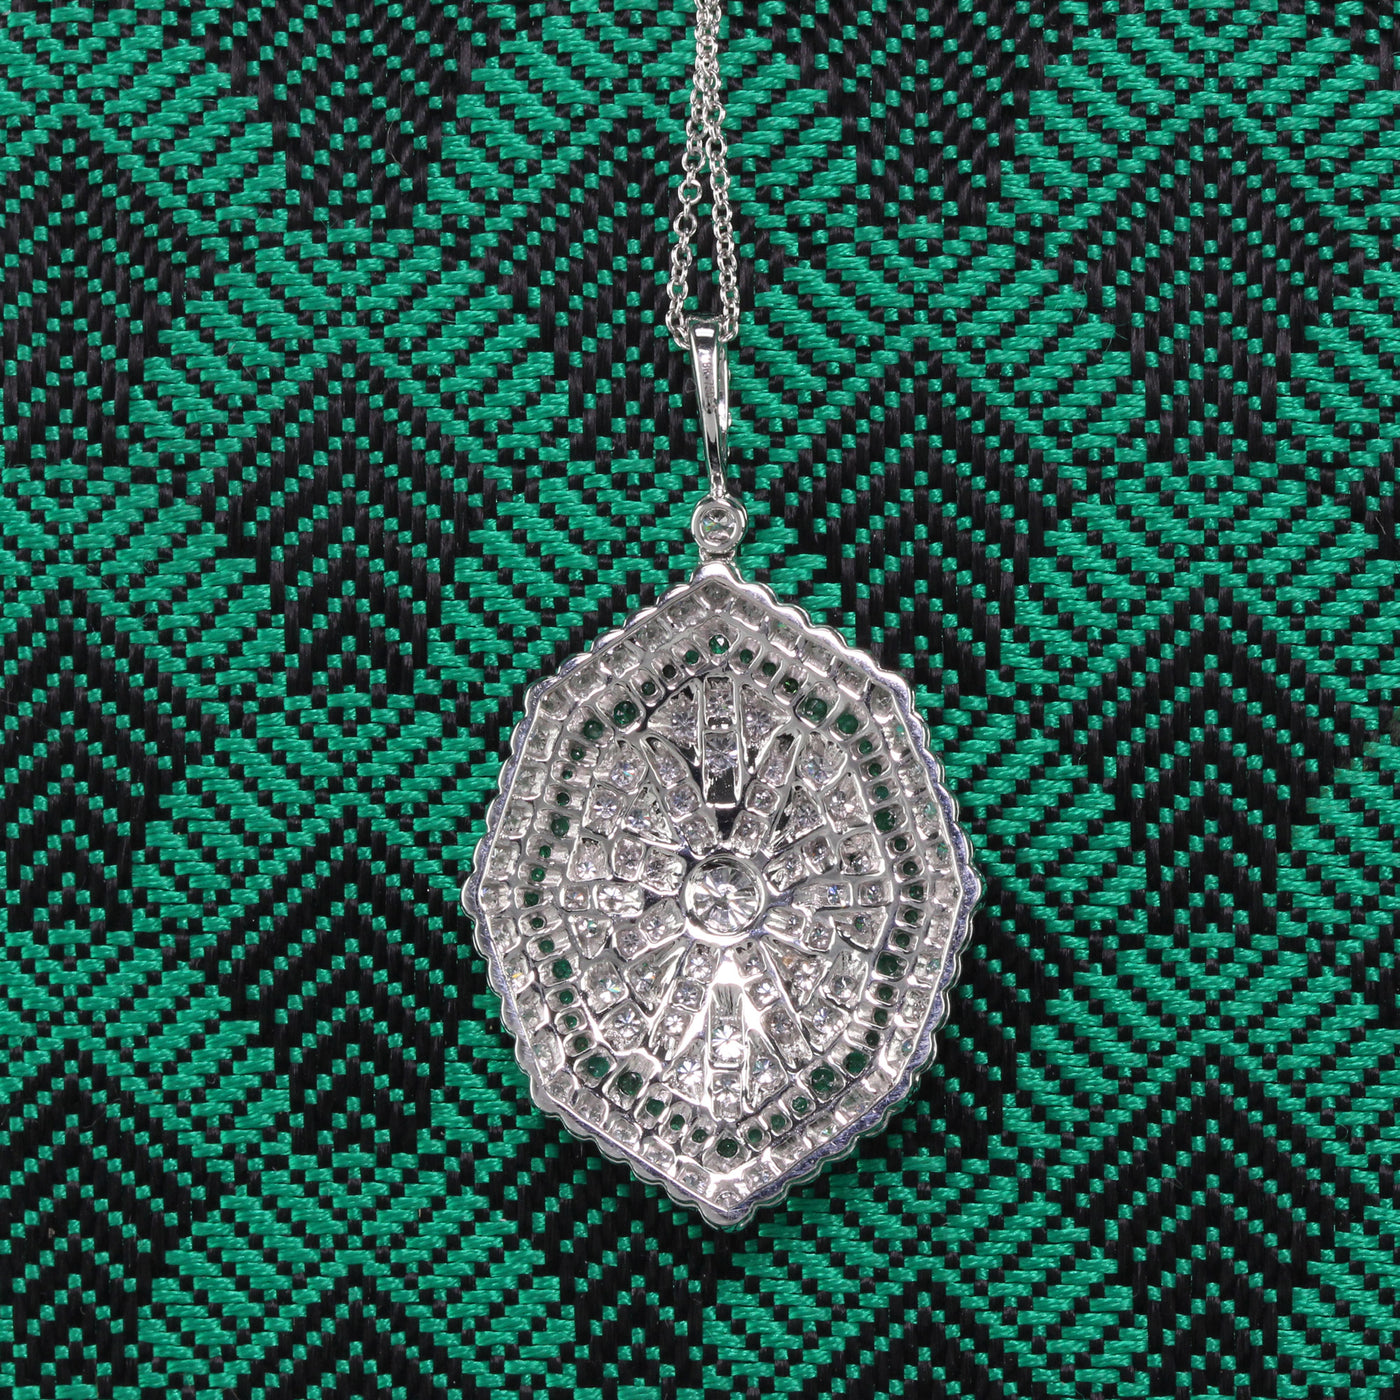 Art Deco Style Pendant - 18K White Gold and Emerald - The Antique Parlour